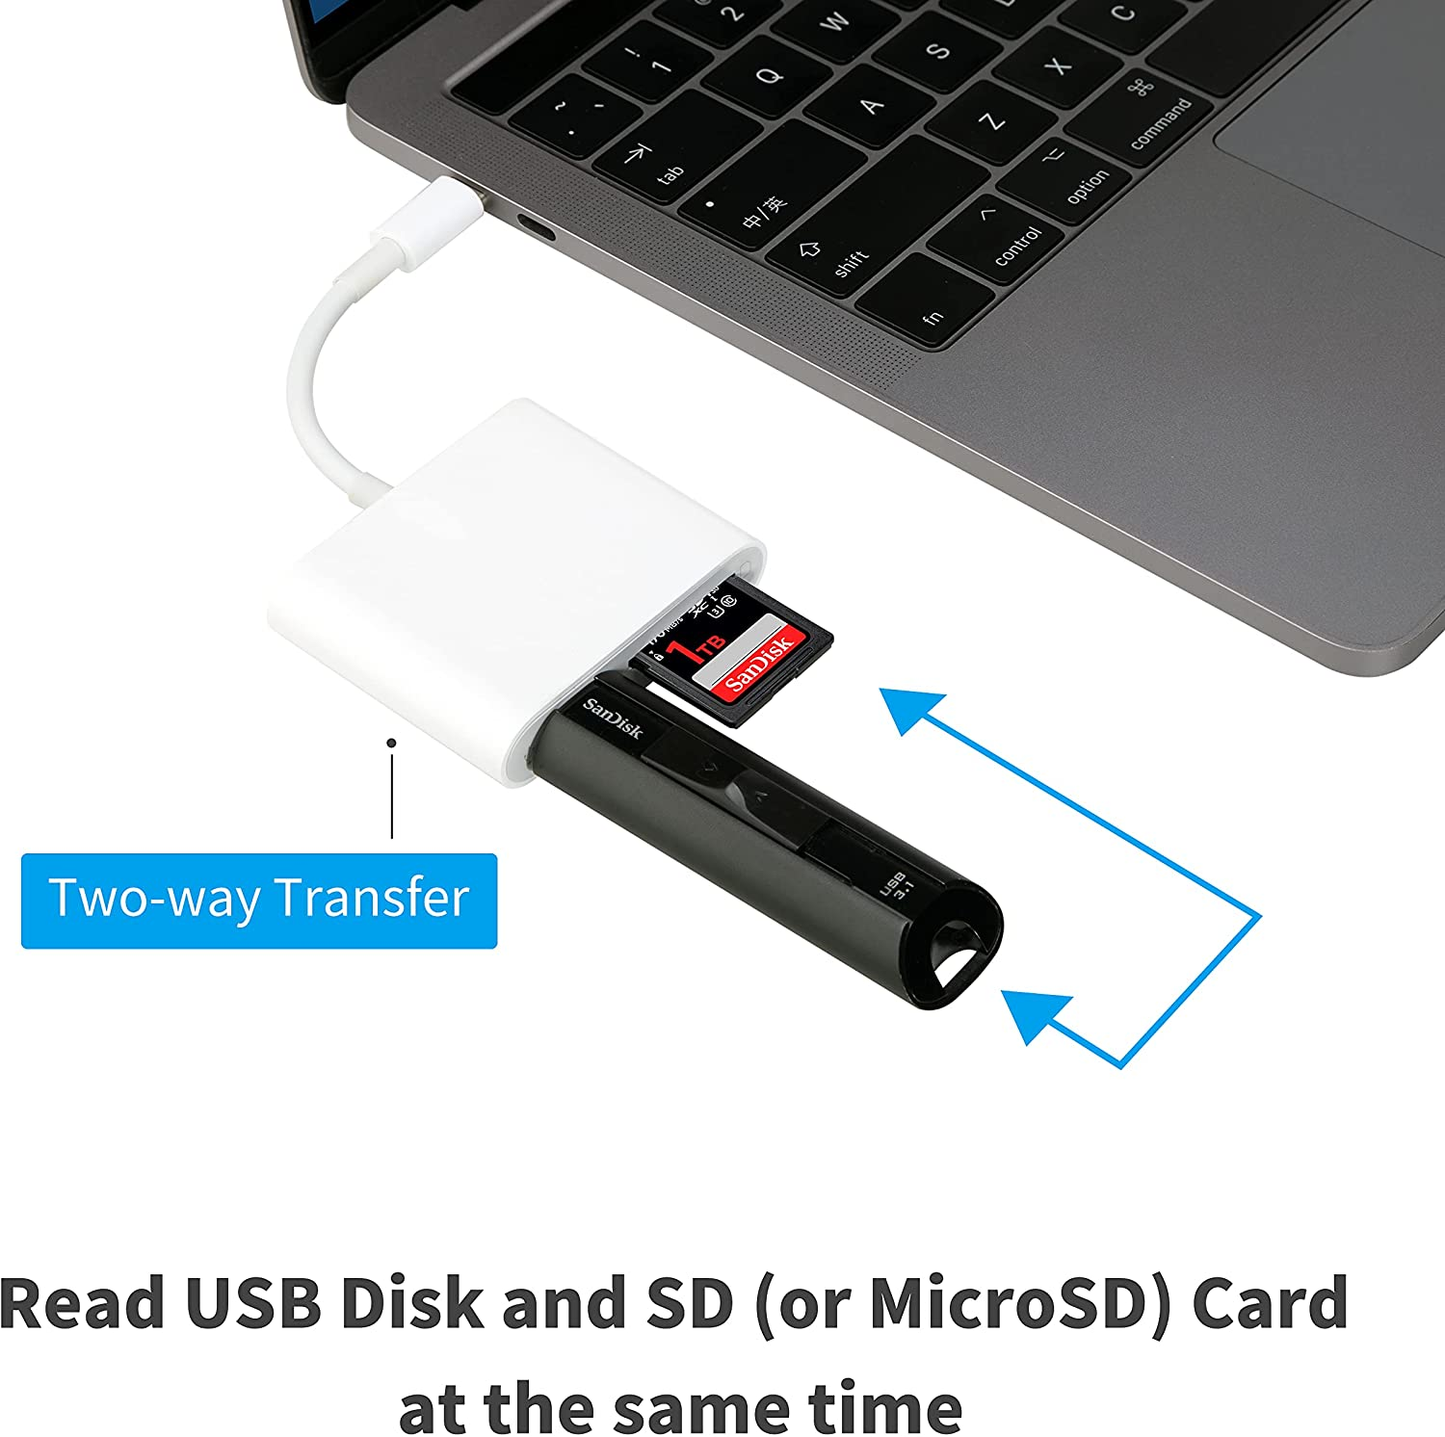 USB C to SD Card Reader with USB 3.0 Thunderbolt to Micro SD TF Card Reader 3 in 1 USB-C to USB Camera Memory Card Reader Adapter for Ipad Pro Macbook Pro/Air Imac M1 XPS13/15 RRSITIAU (White)